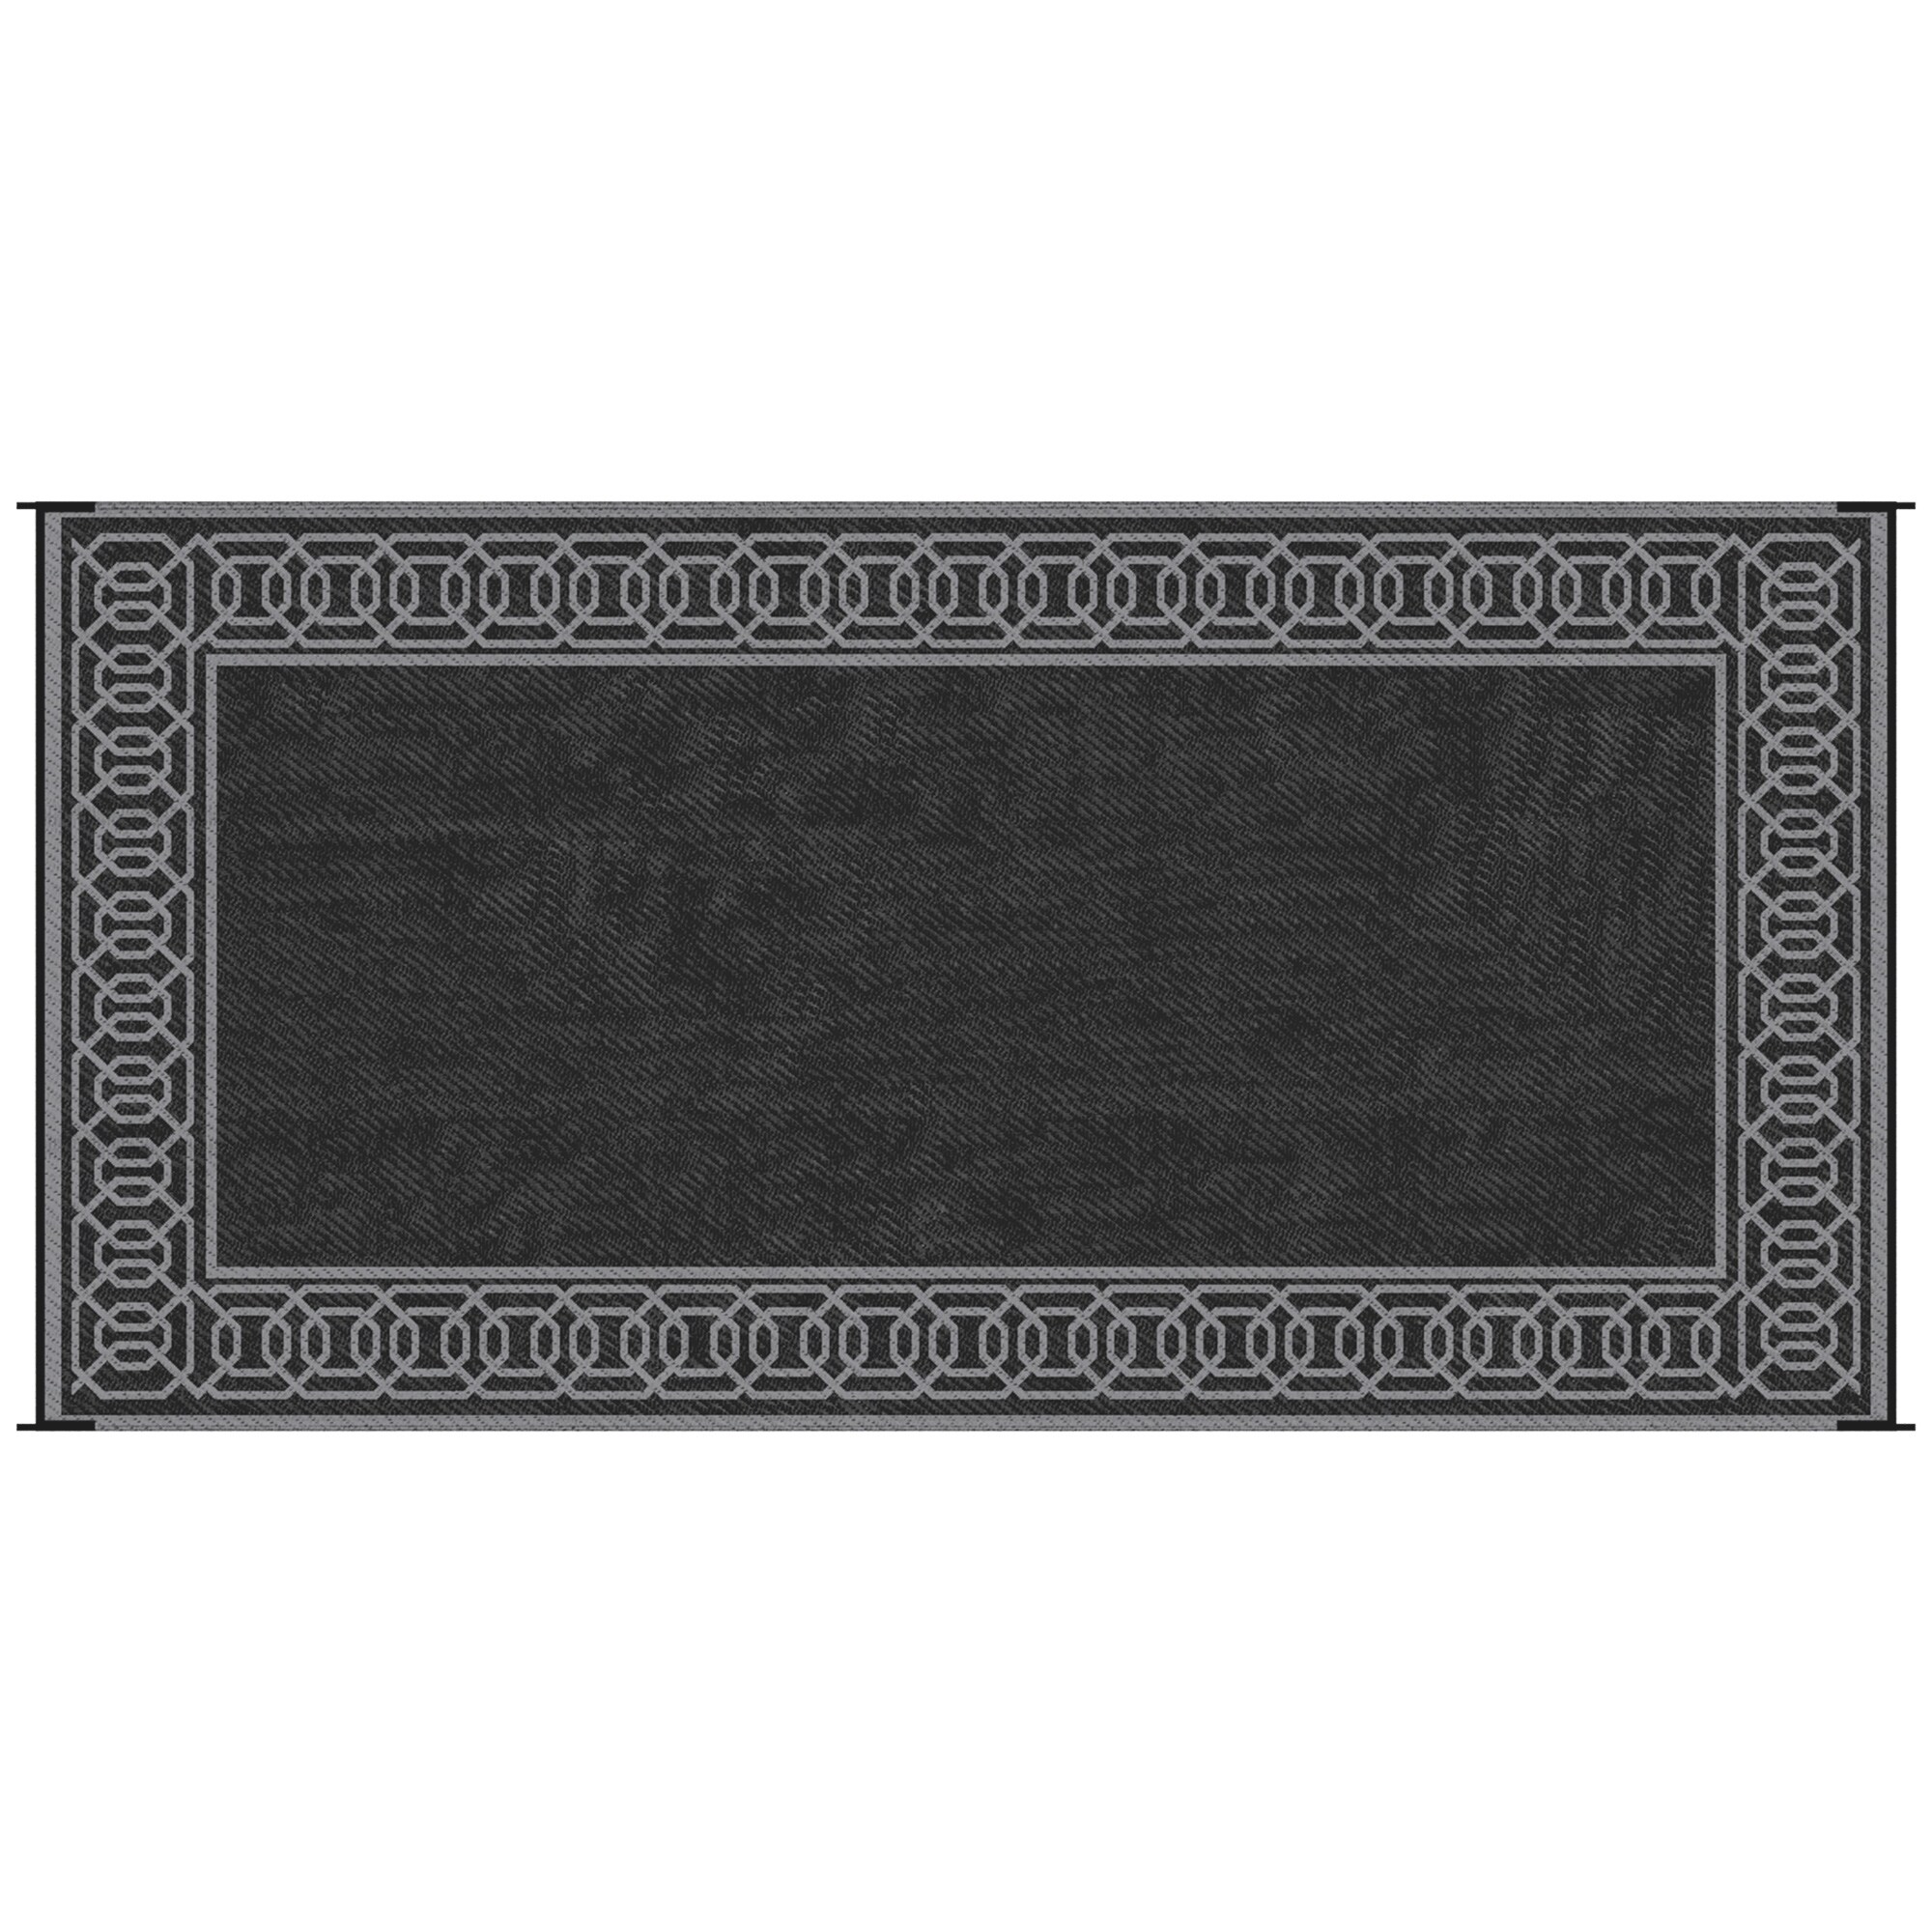 https://ak1.ostkcdn.com/images/products/is/images/direct/e63099ed03d77aa4b94a08a70490cb9e45dd59ca/Outsunny-RV-Mat%2C-Outdoor-Patio-Rug---Large-Camping-Carpet-with-Carrying-Bag%2C-9%27-x-18%27%2C-Waterproof-Plastic-Straw.jpg